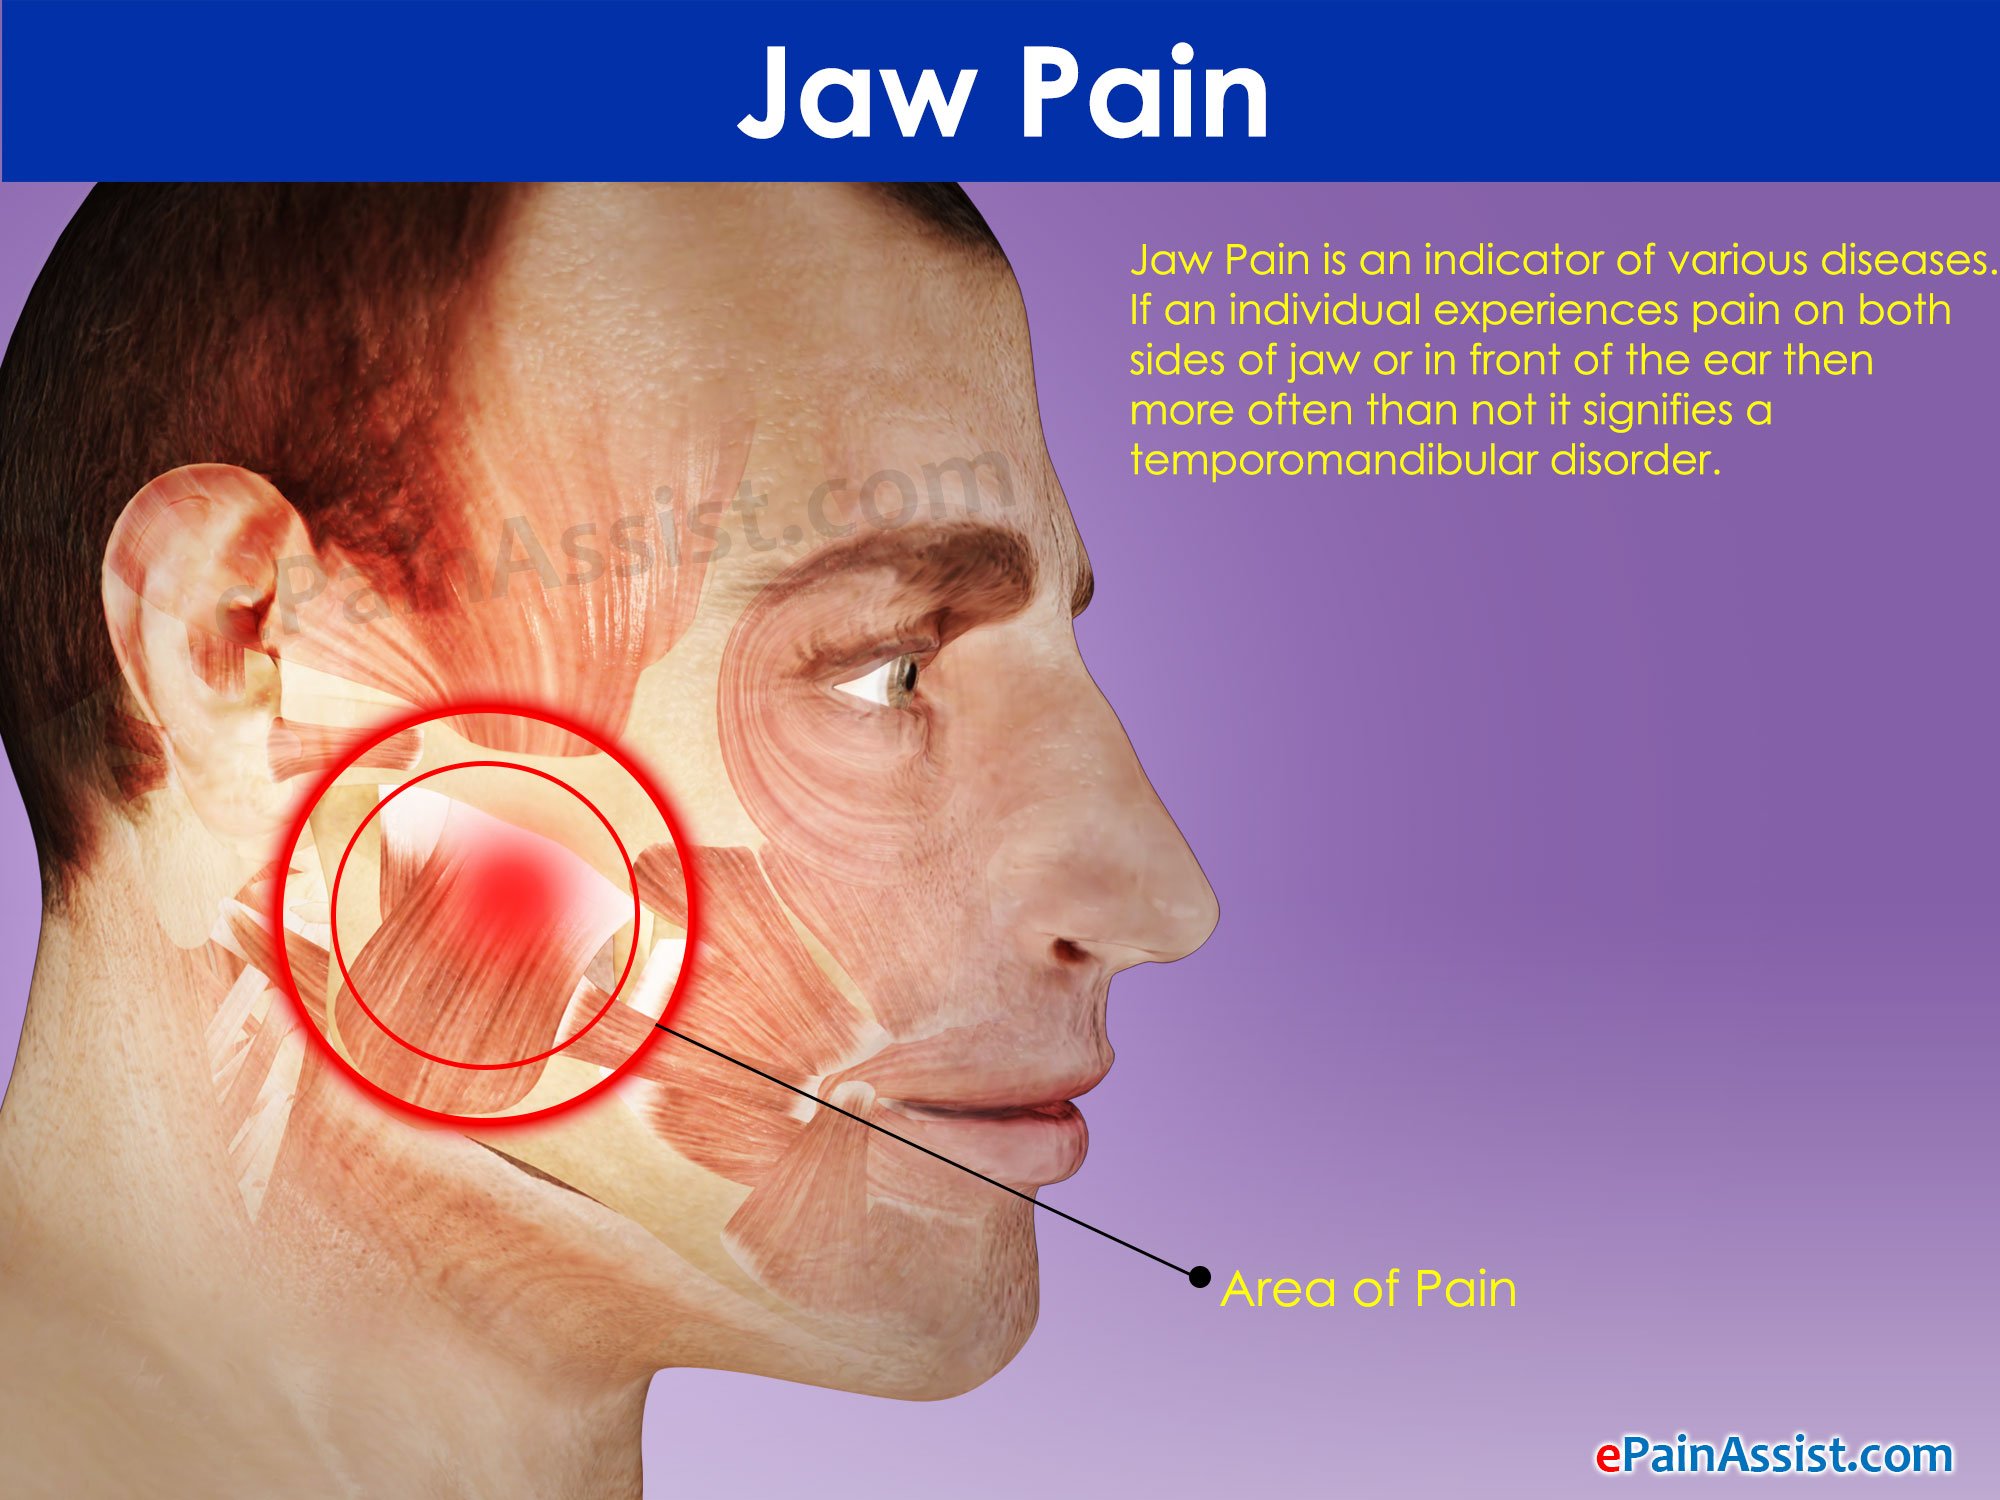 Jaw Pain: Medical Conditions That Can Cause Painful Jaw